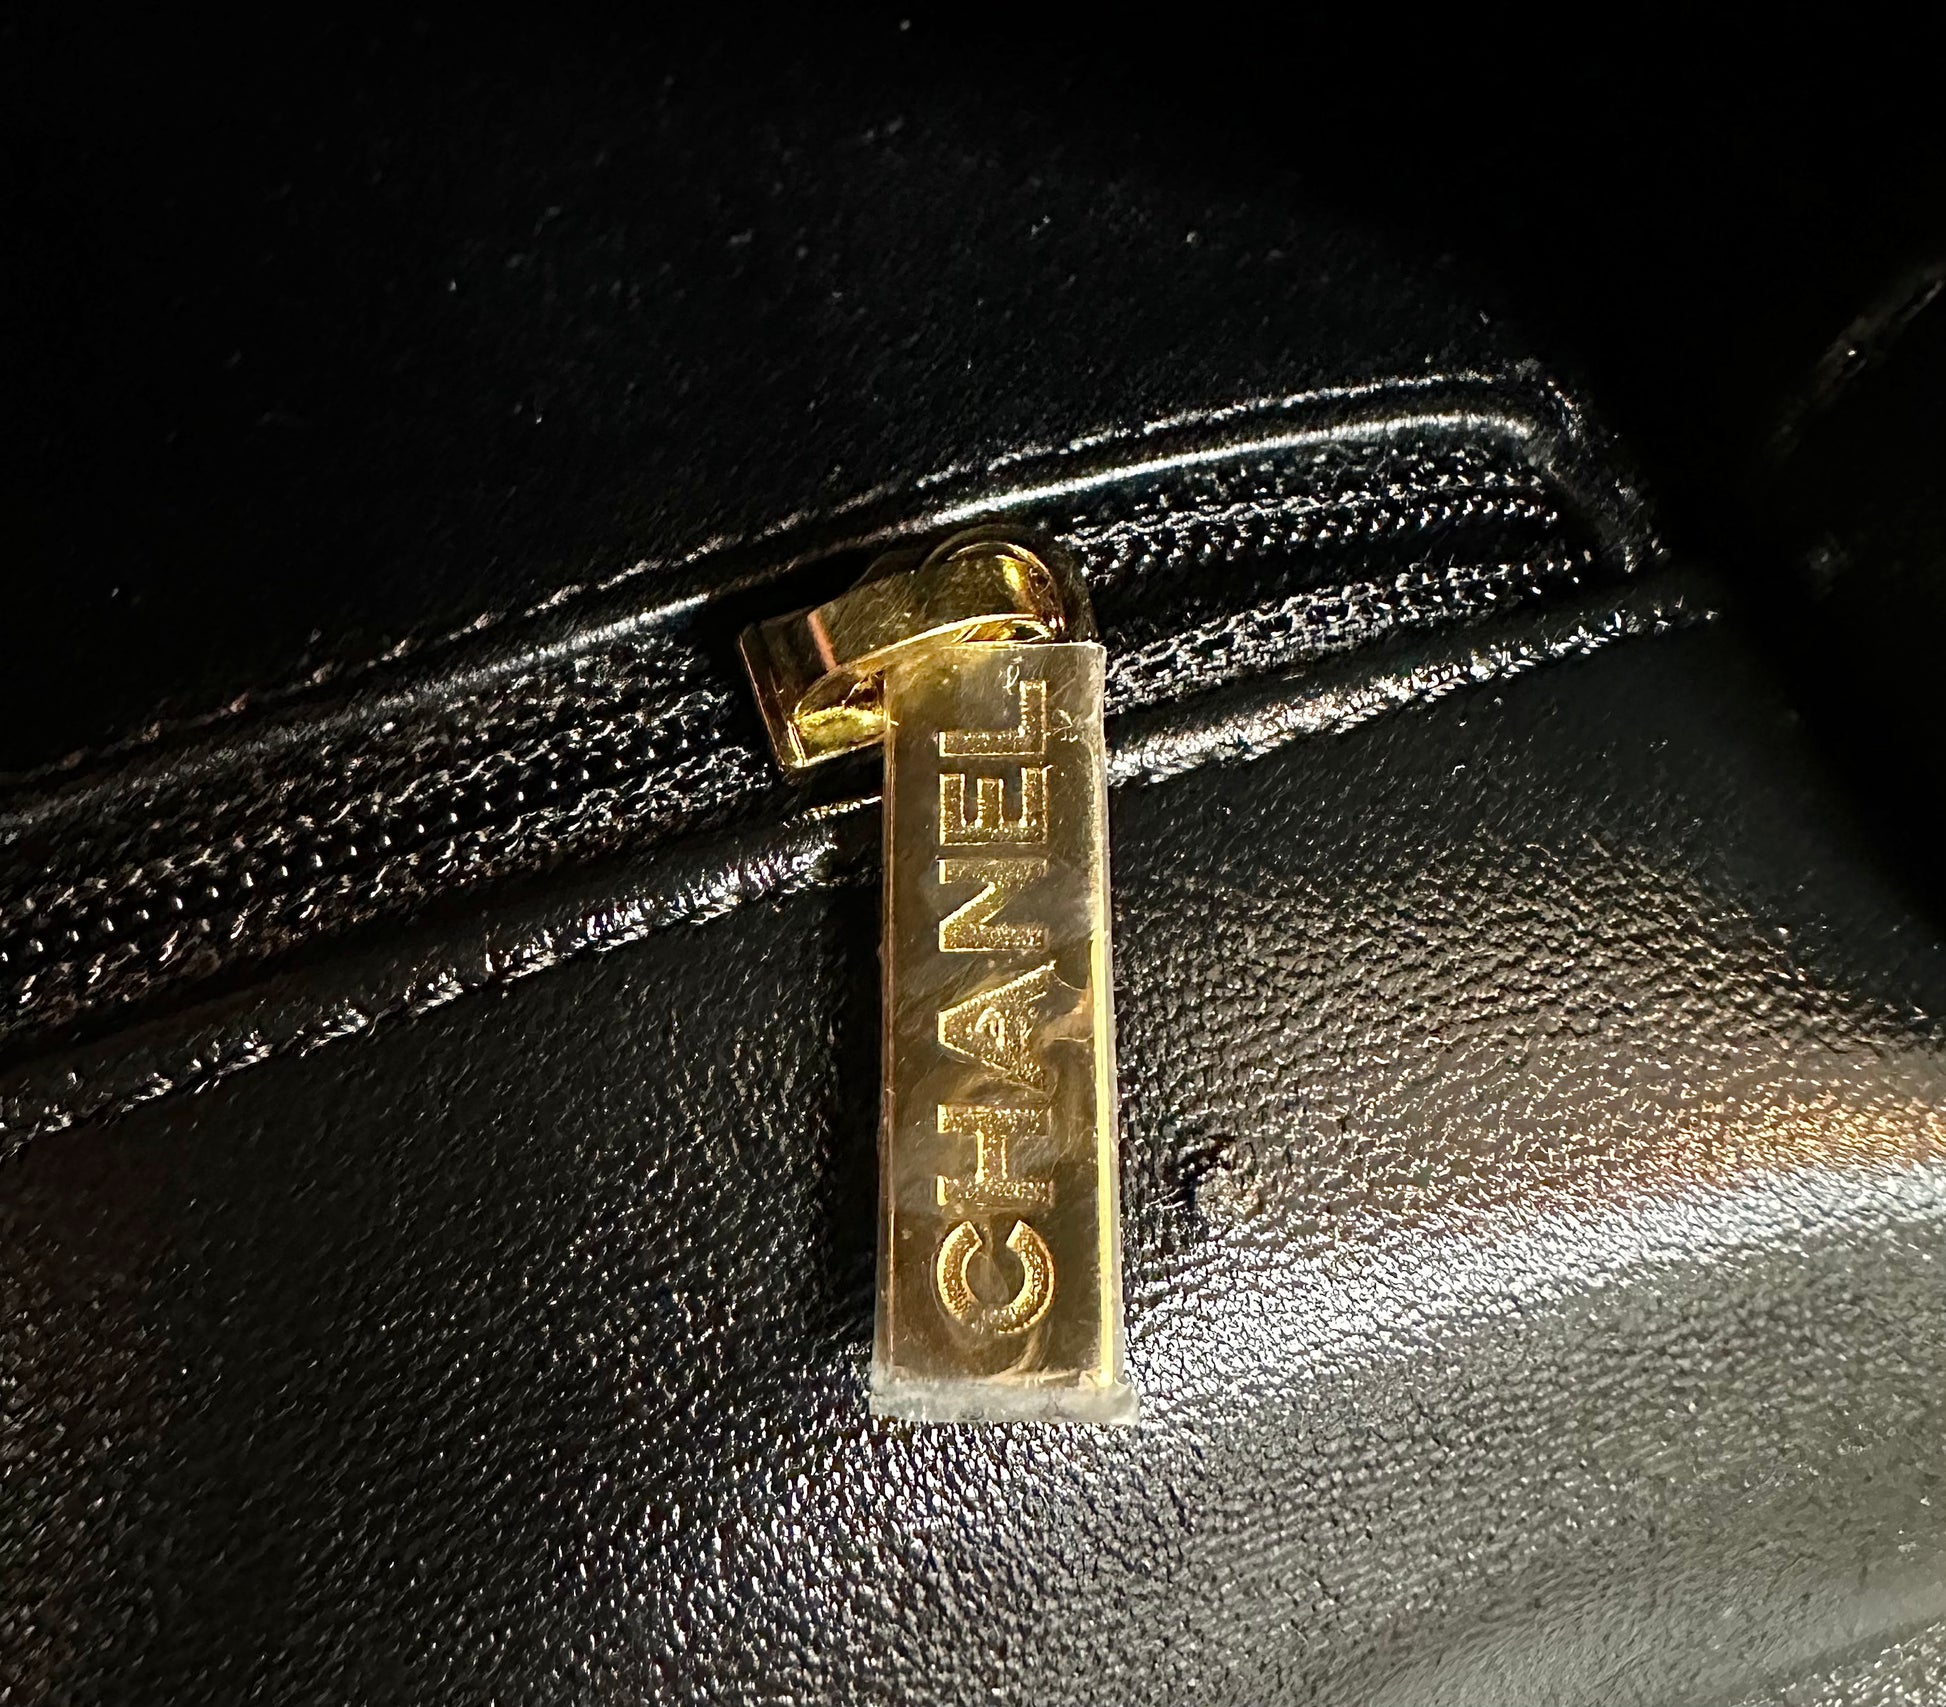 Close up of Chanel engraved on gold interior zipper with plastic still on it.